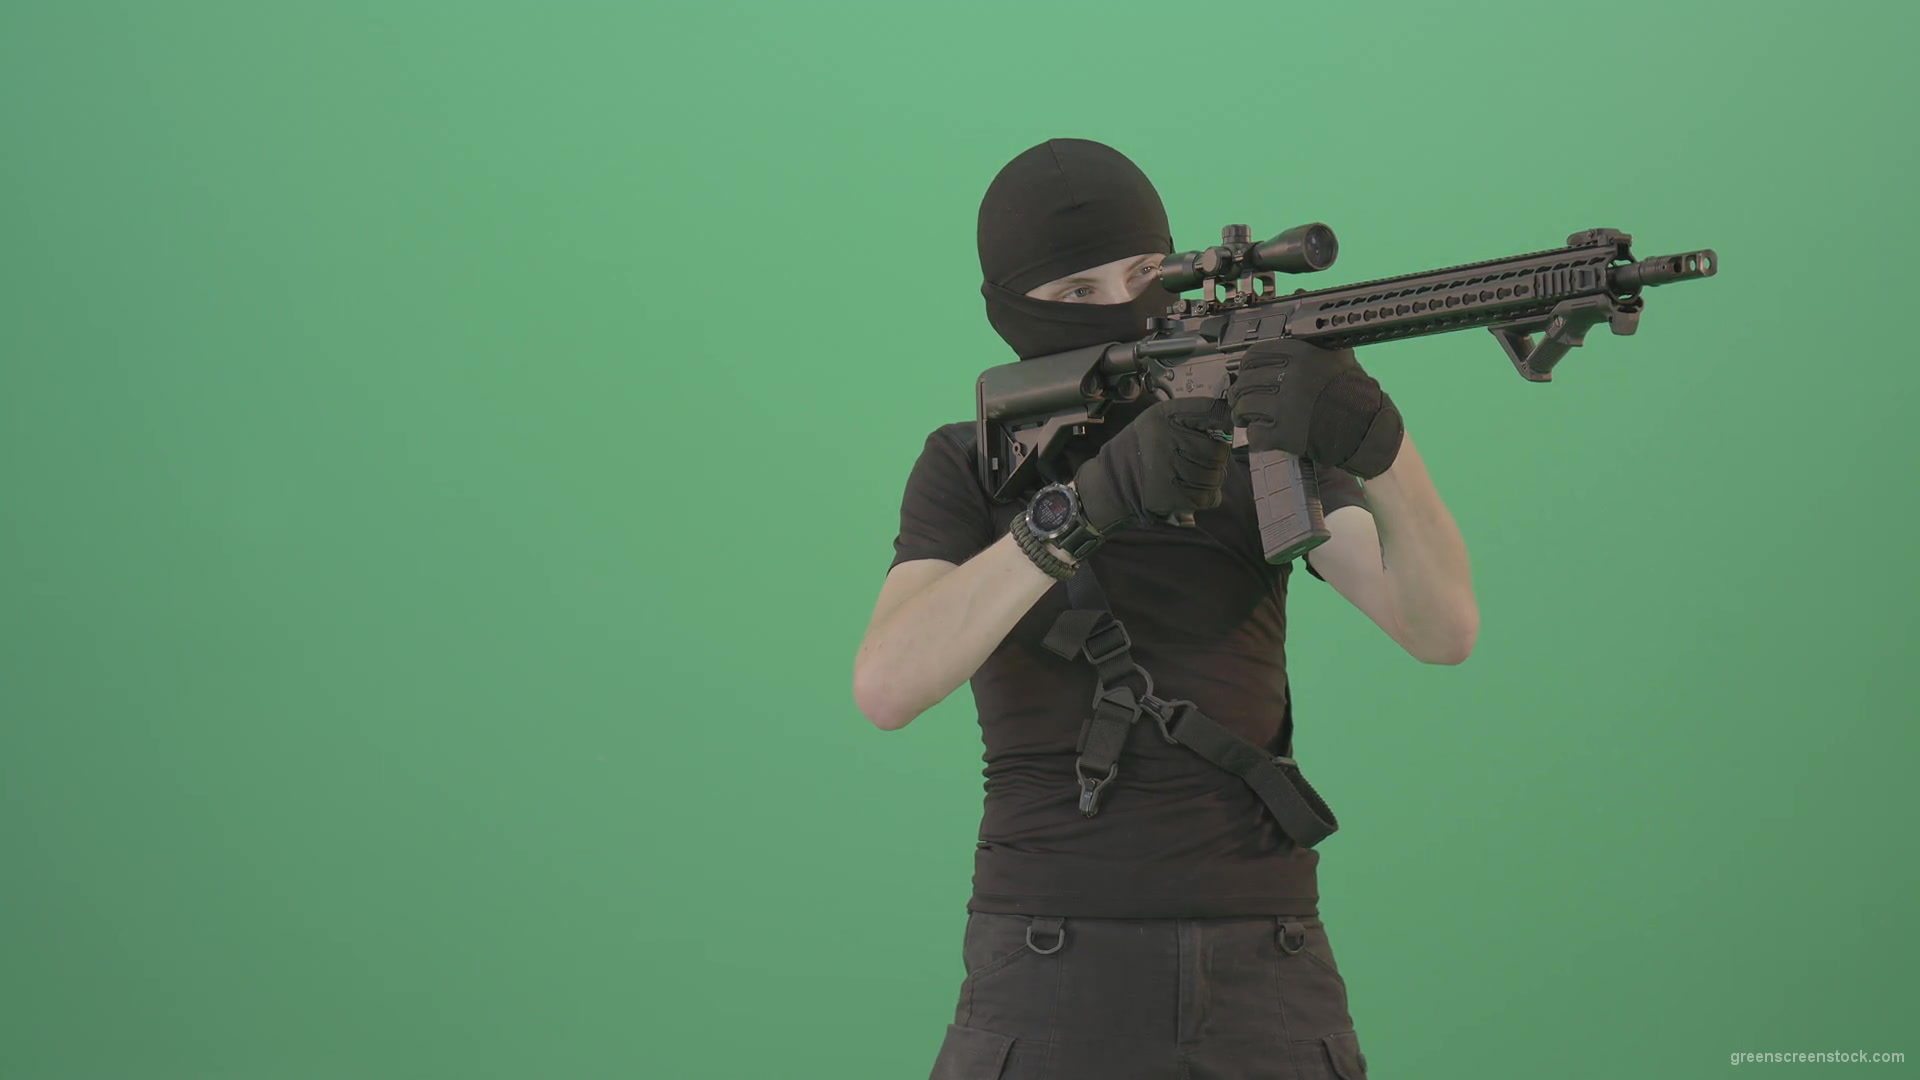 Soldier-in-black-mask-shooting-enemies-with-military-gun-on-green-screen-4K-Video-Footage-1920_007 Green Screen Stock